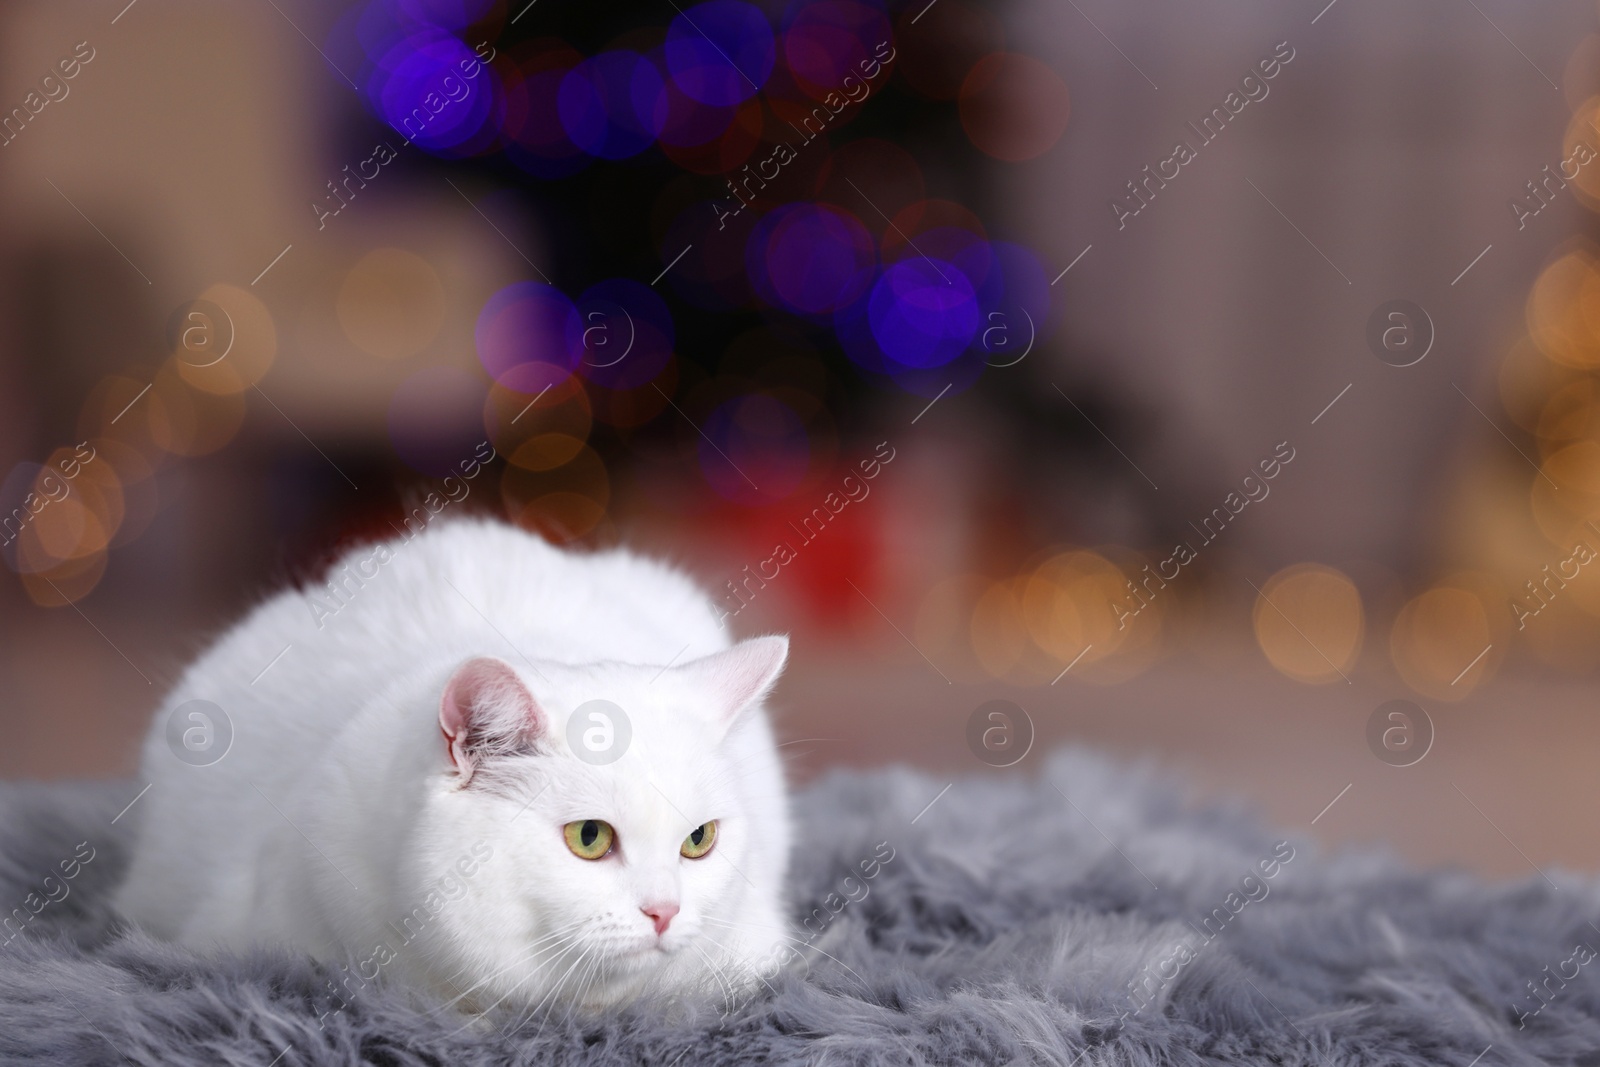 Photo of Christmas atmosphere. Cute cat lying on fur rug against blurred lights. Space for text